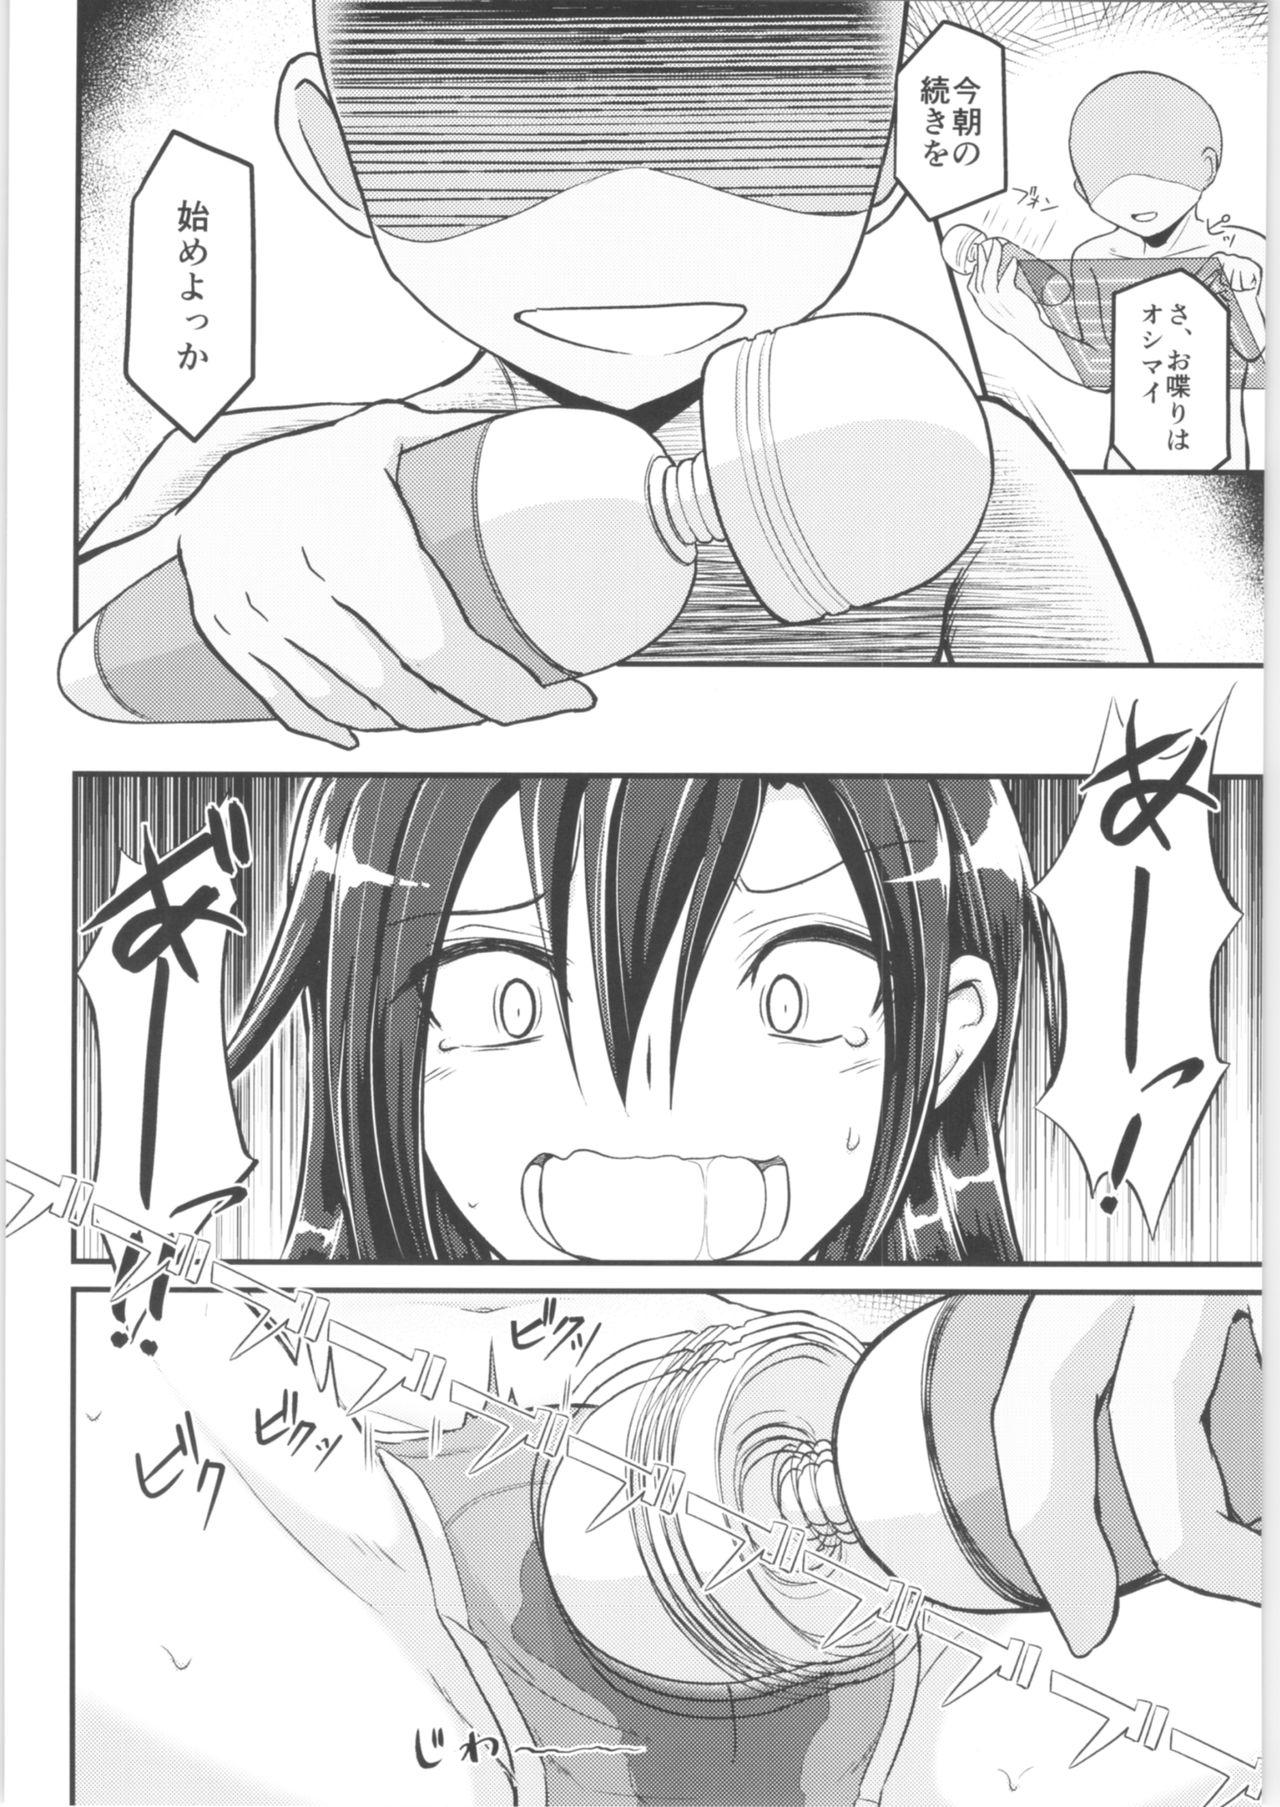 Ass Lick Another 01 - Sword art online Pussy - Page 9